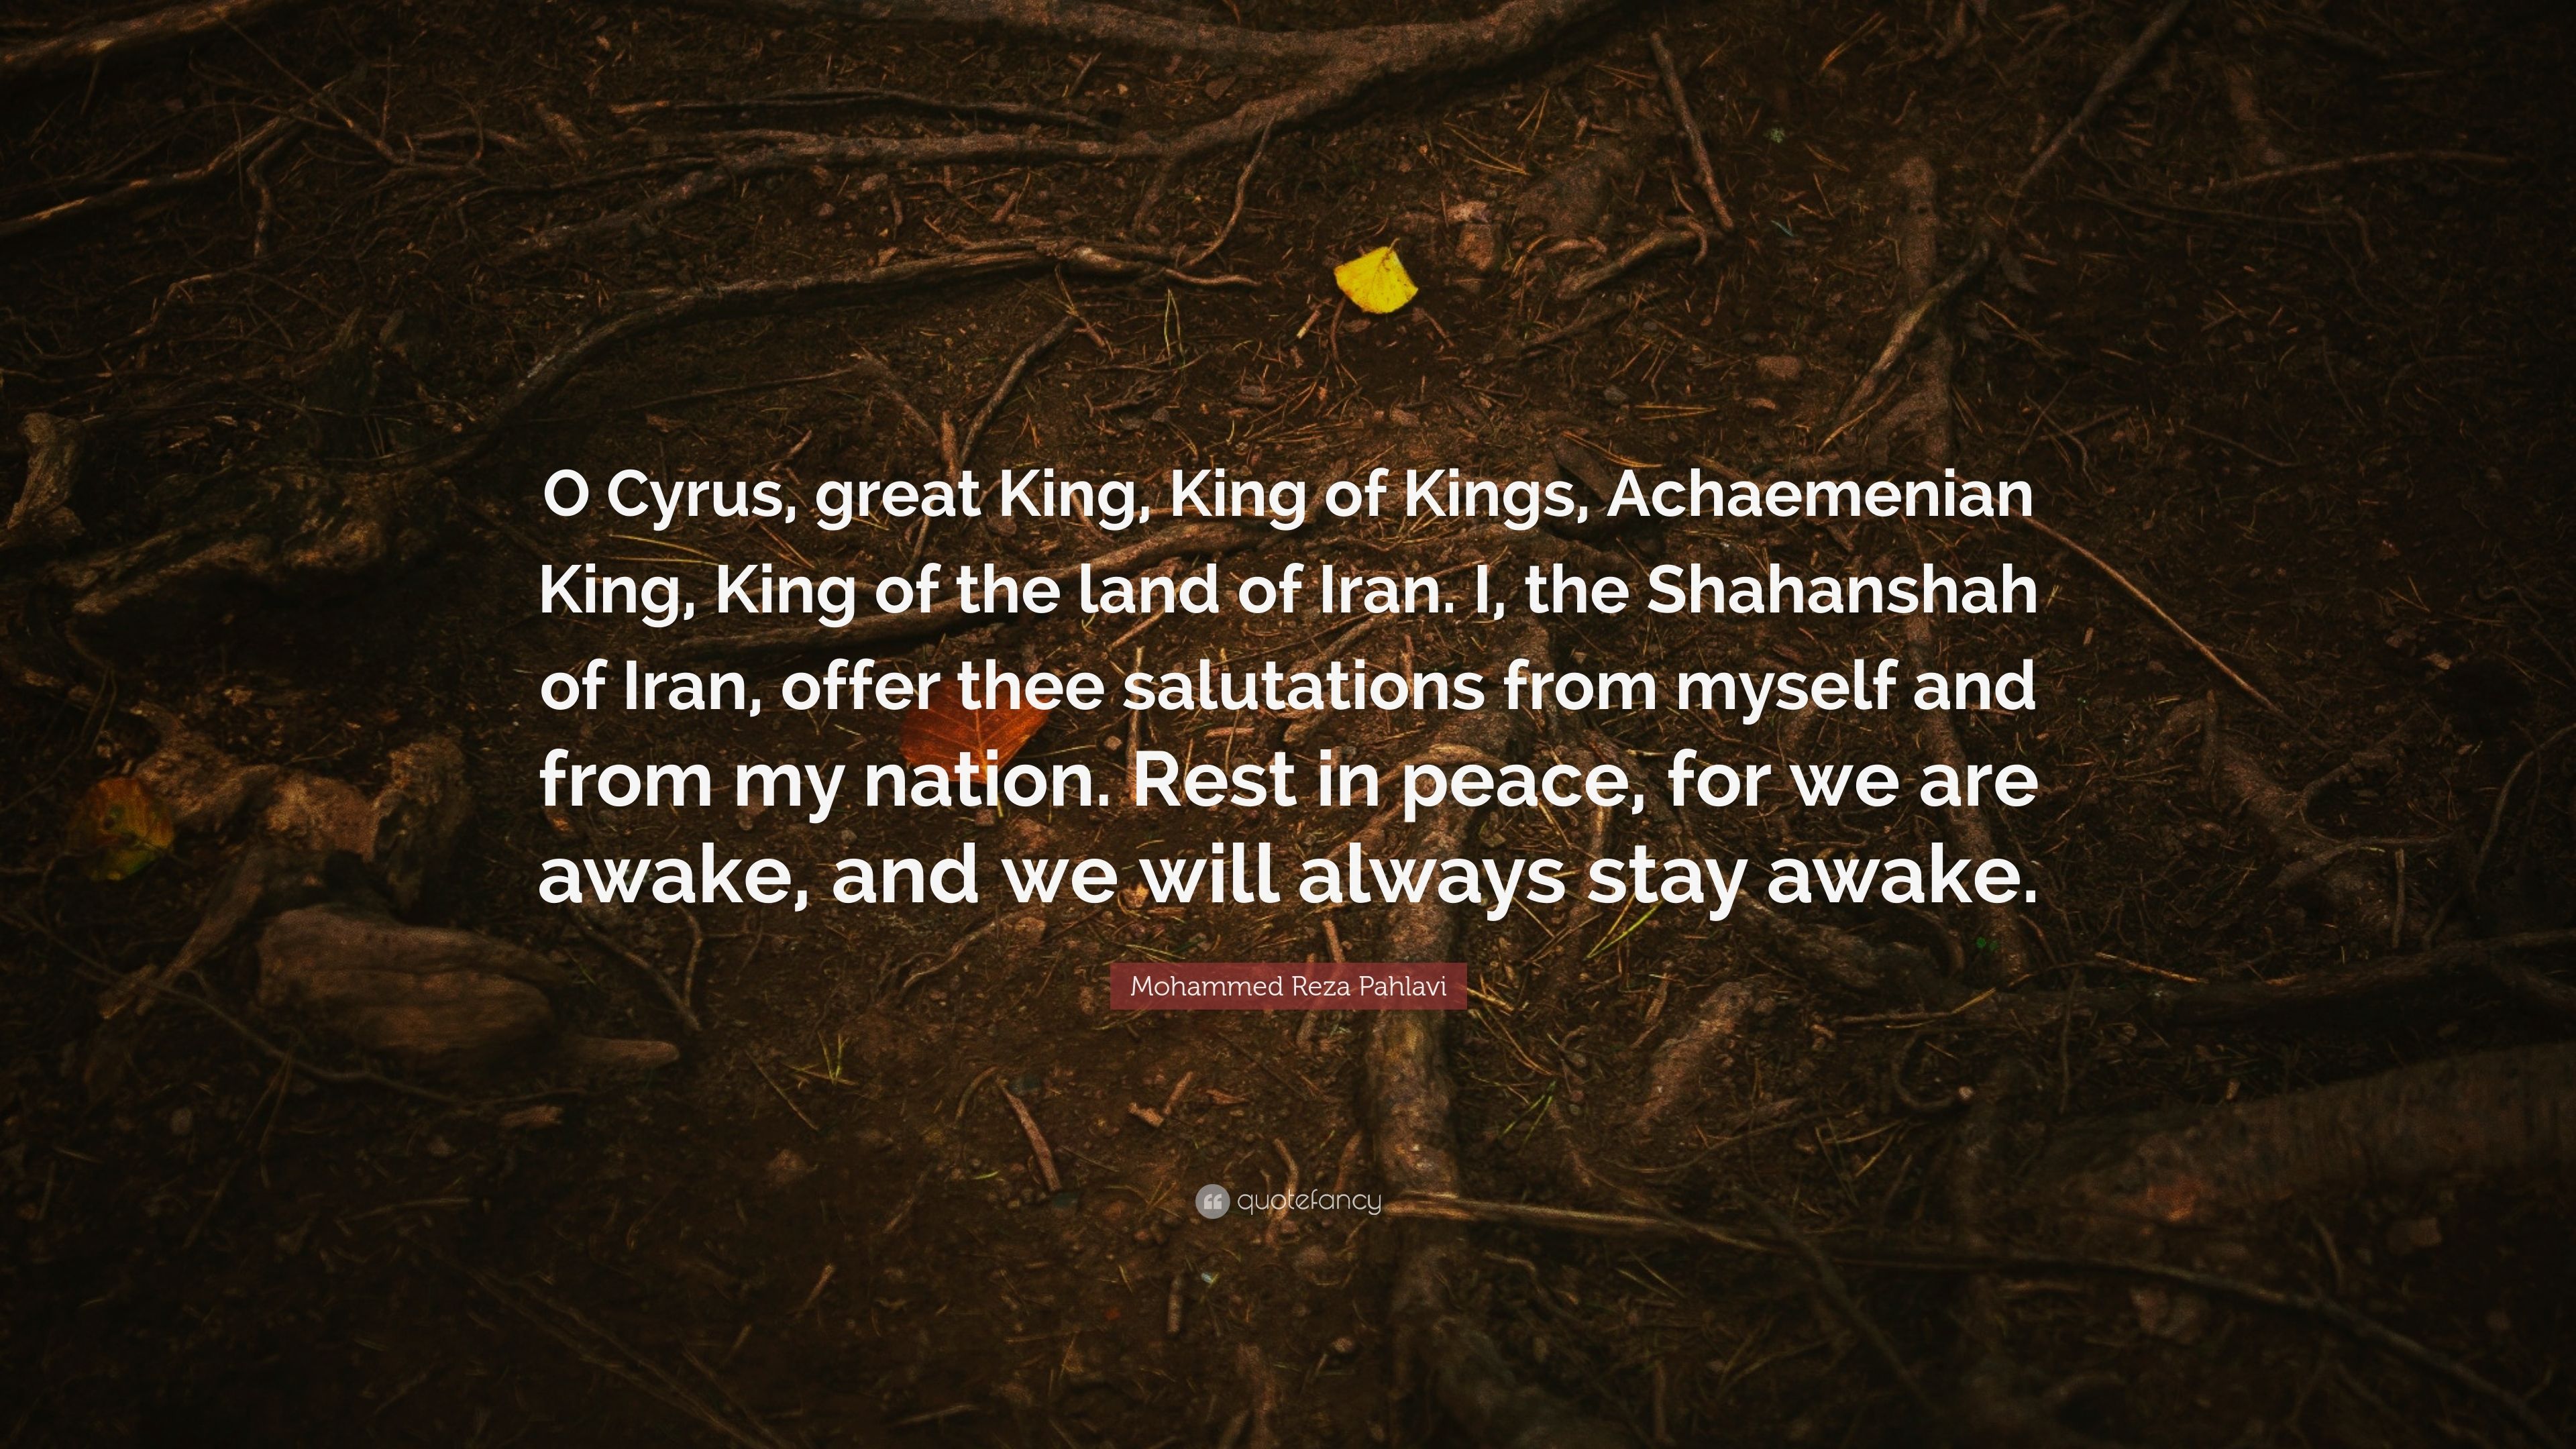 Mohammed Reza Pahlavi Quote: “O Cyrus, great King, King of Kings